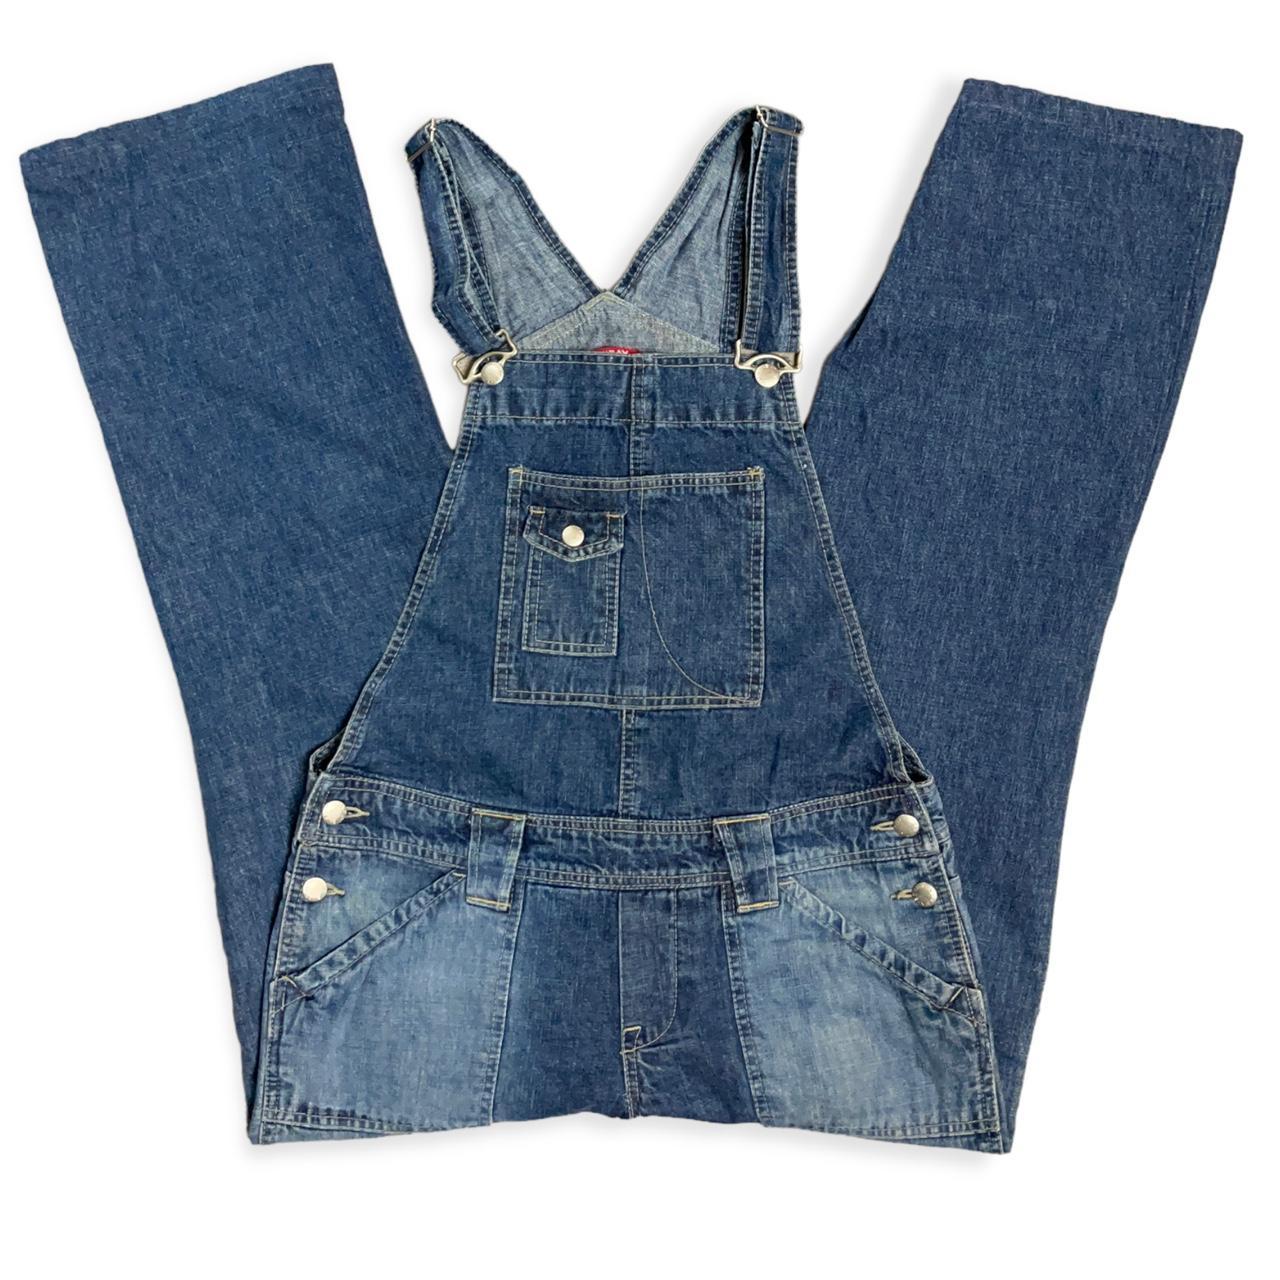 Union Bay Men's Blue Dungarees-overalls